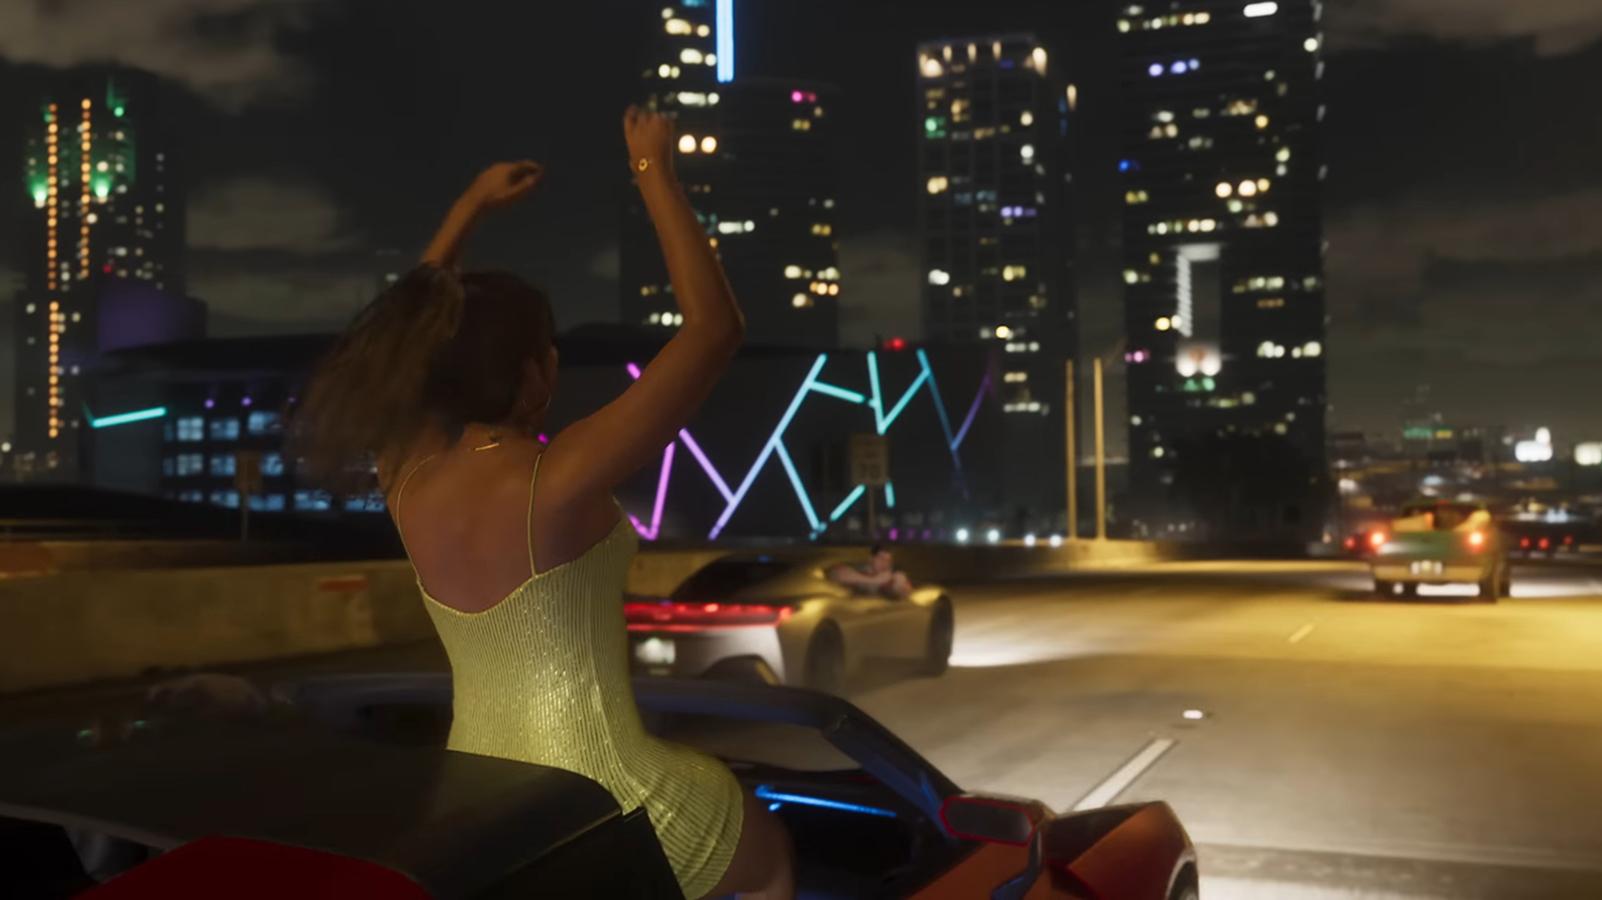 GTA 6 reveal trailer song soars on Spotify as millions flock to